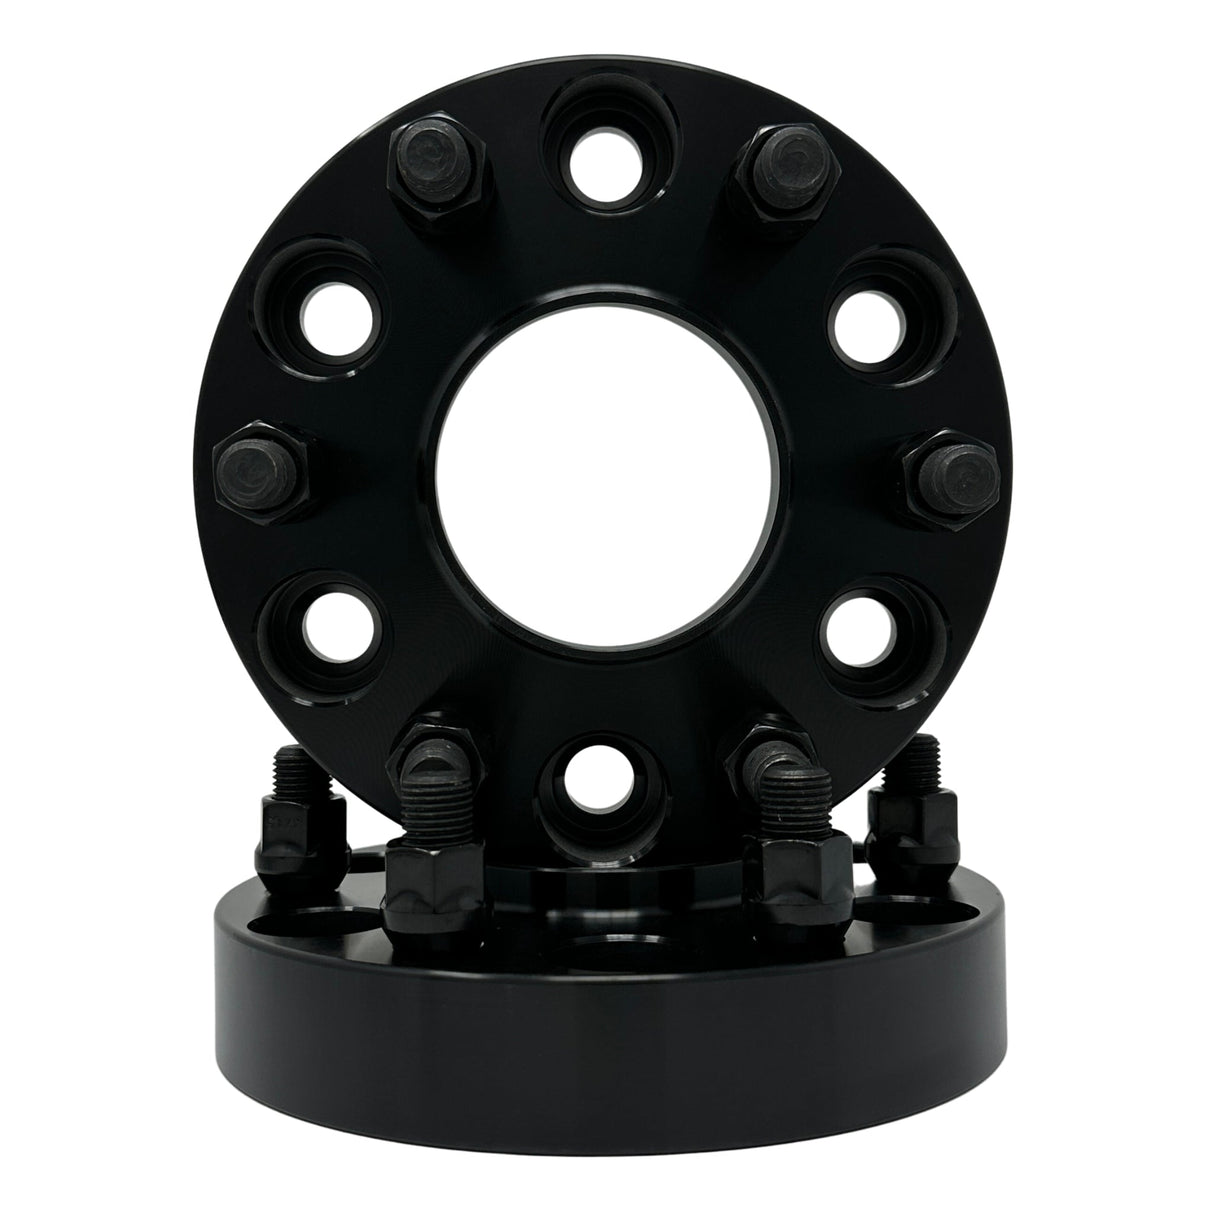 Ford 6x135 Hubcentric Wheel Spacers For 2015 & Newer Models F-150, Raptor, Expedition, Navigator 6x135 | Ford OEM 87.1mm Bore & Wheel Centering Lip | 14x1.5 Studs 1" Inch - 2" Inch Thicknesses